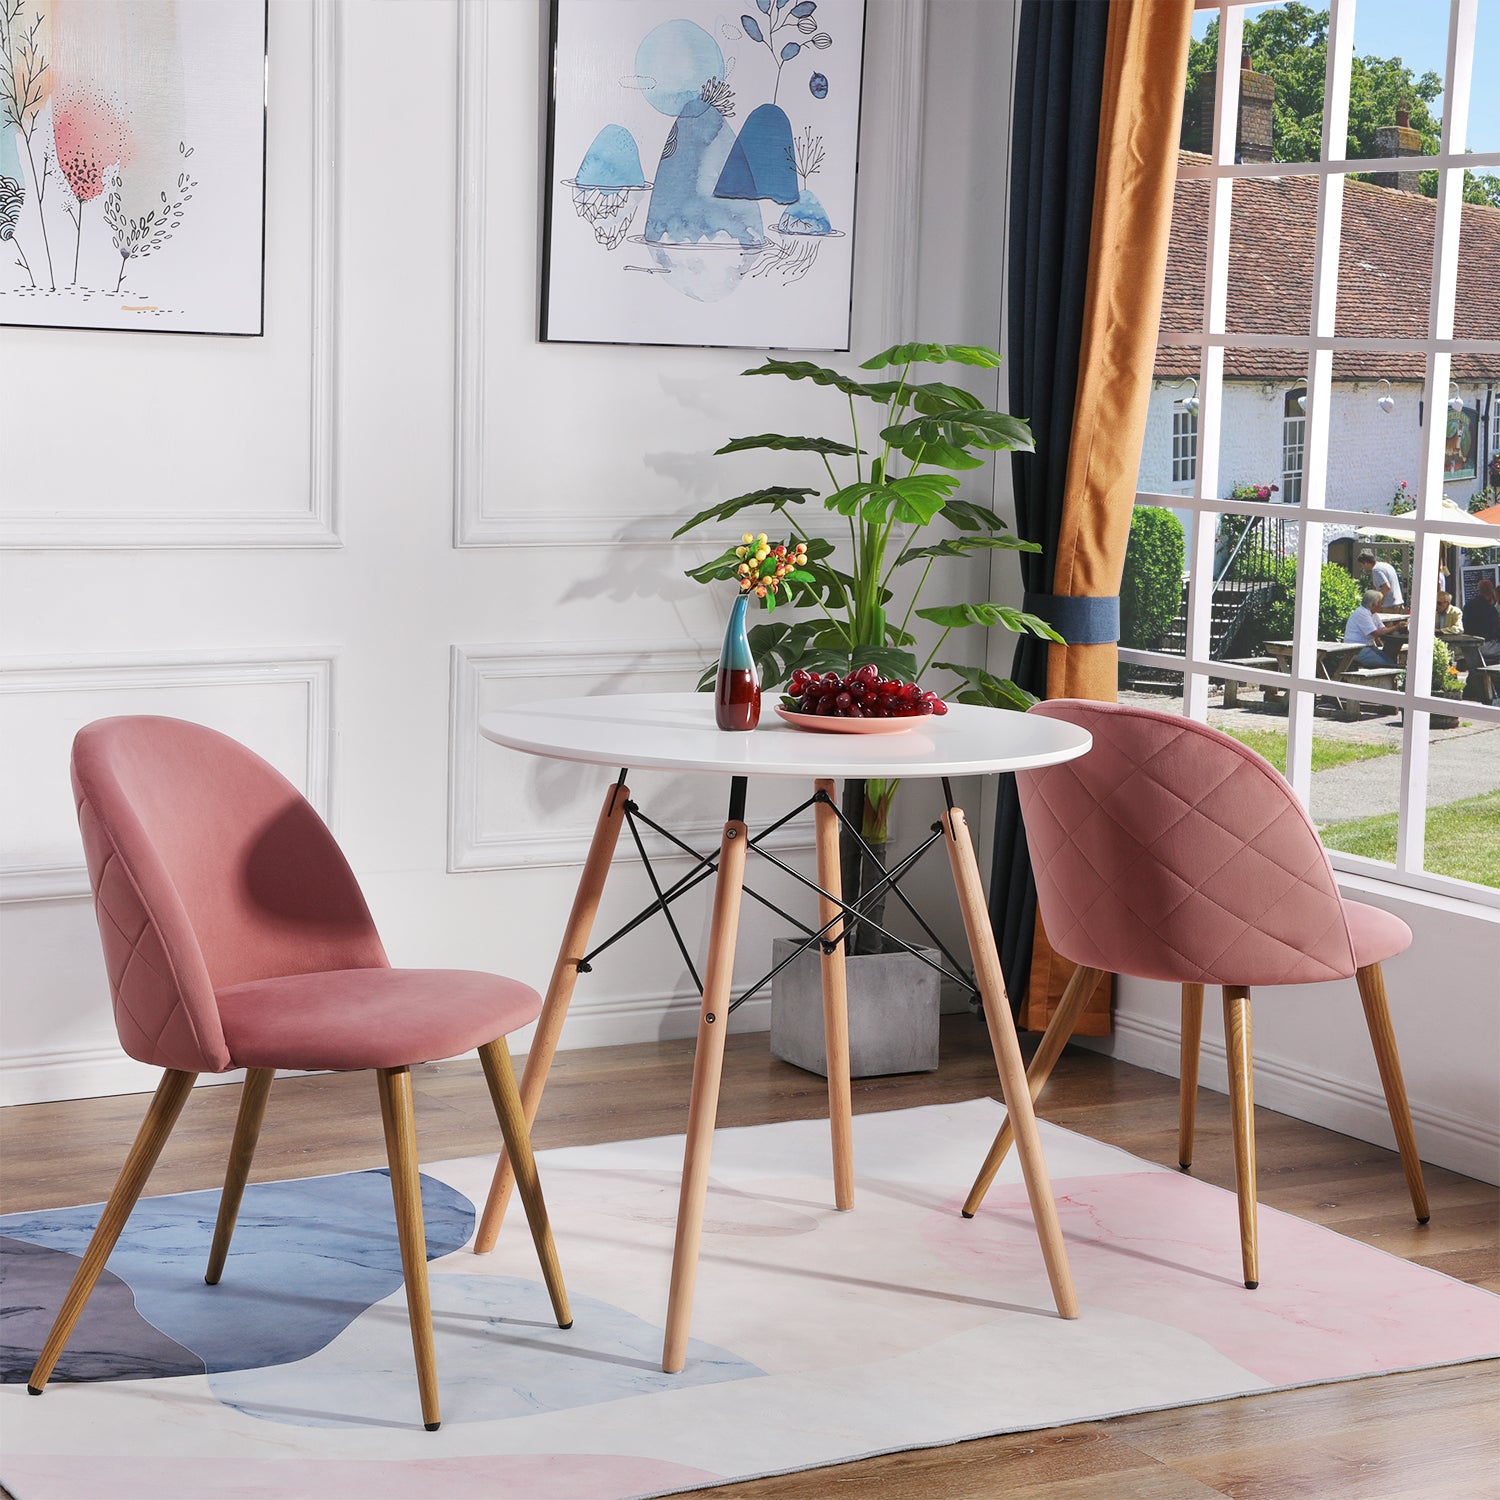 ZOMBA Velvet Dining Chairs with Metal Legs - Pink/Blue/Cactus